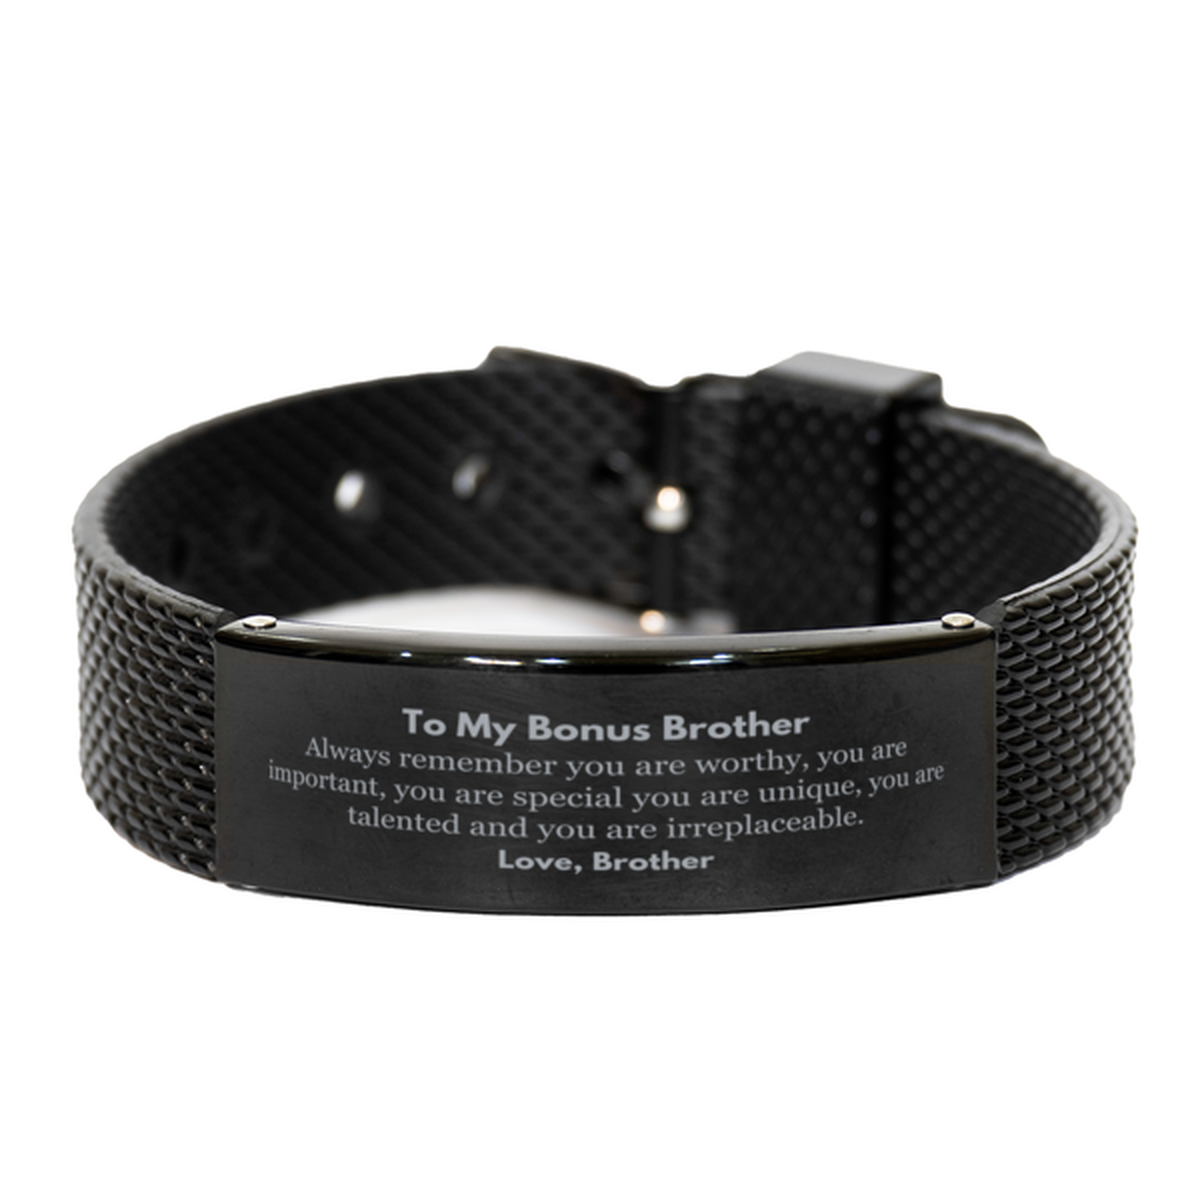 Bonus Brother Birthday Gifts from Brother, Inspirational Black Shark Mesh Bracelet for Bonus Brother Christmas Graduation Gifts for Bonus Brother Always remember you are worthy, you are important. Love, Brother